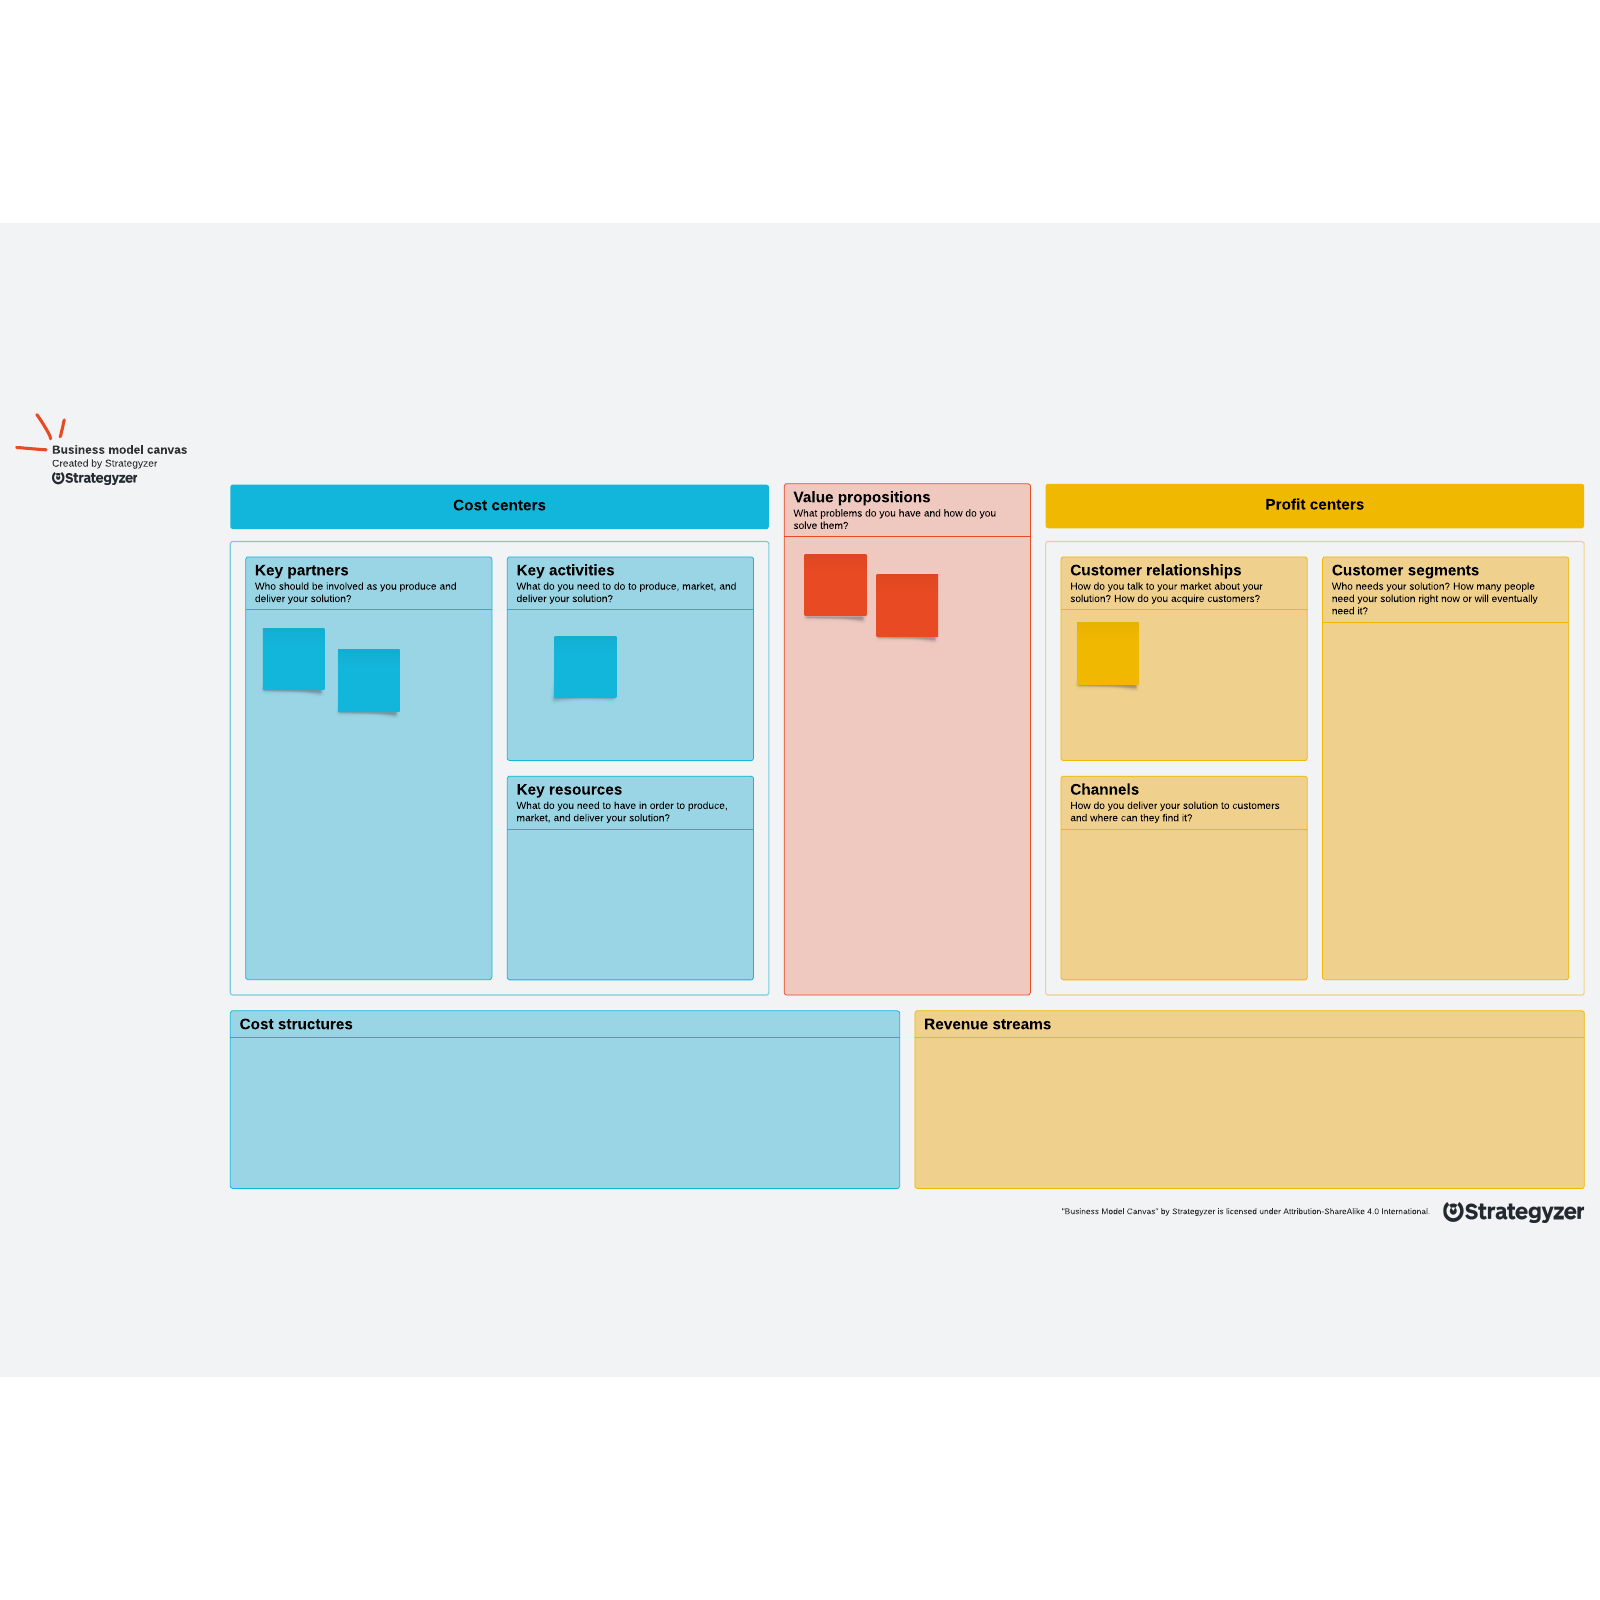 Business Model Canvas Template Lucidspark Welcome To The Neos